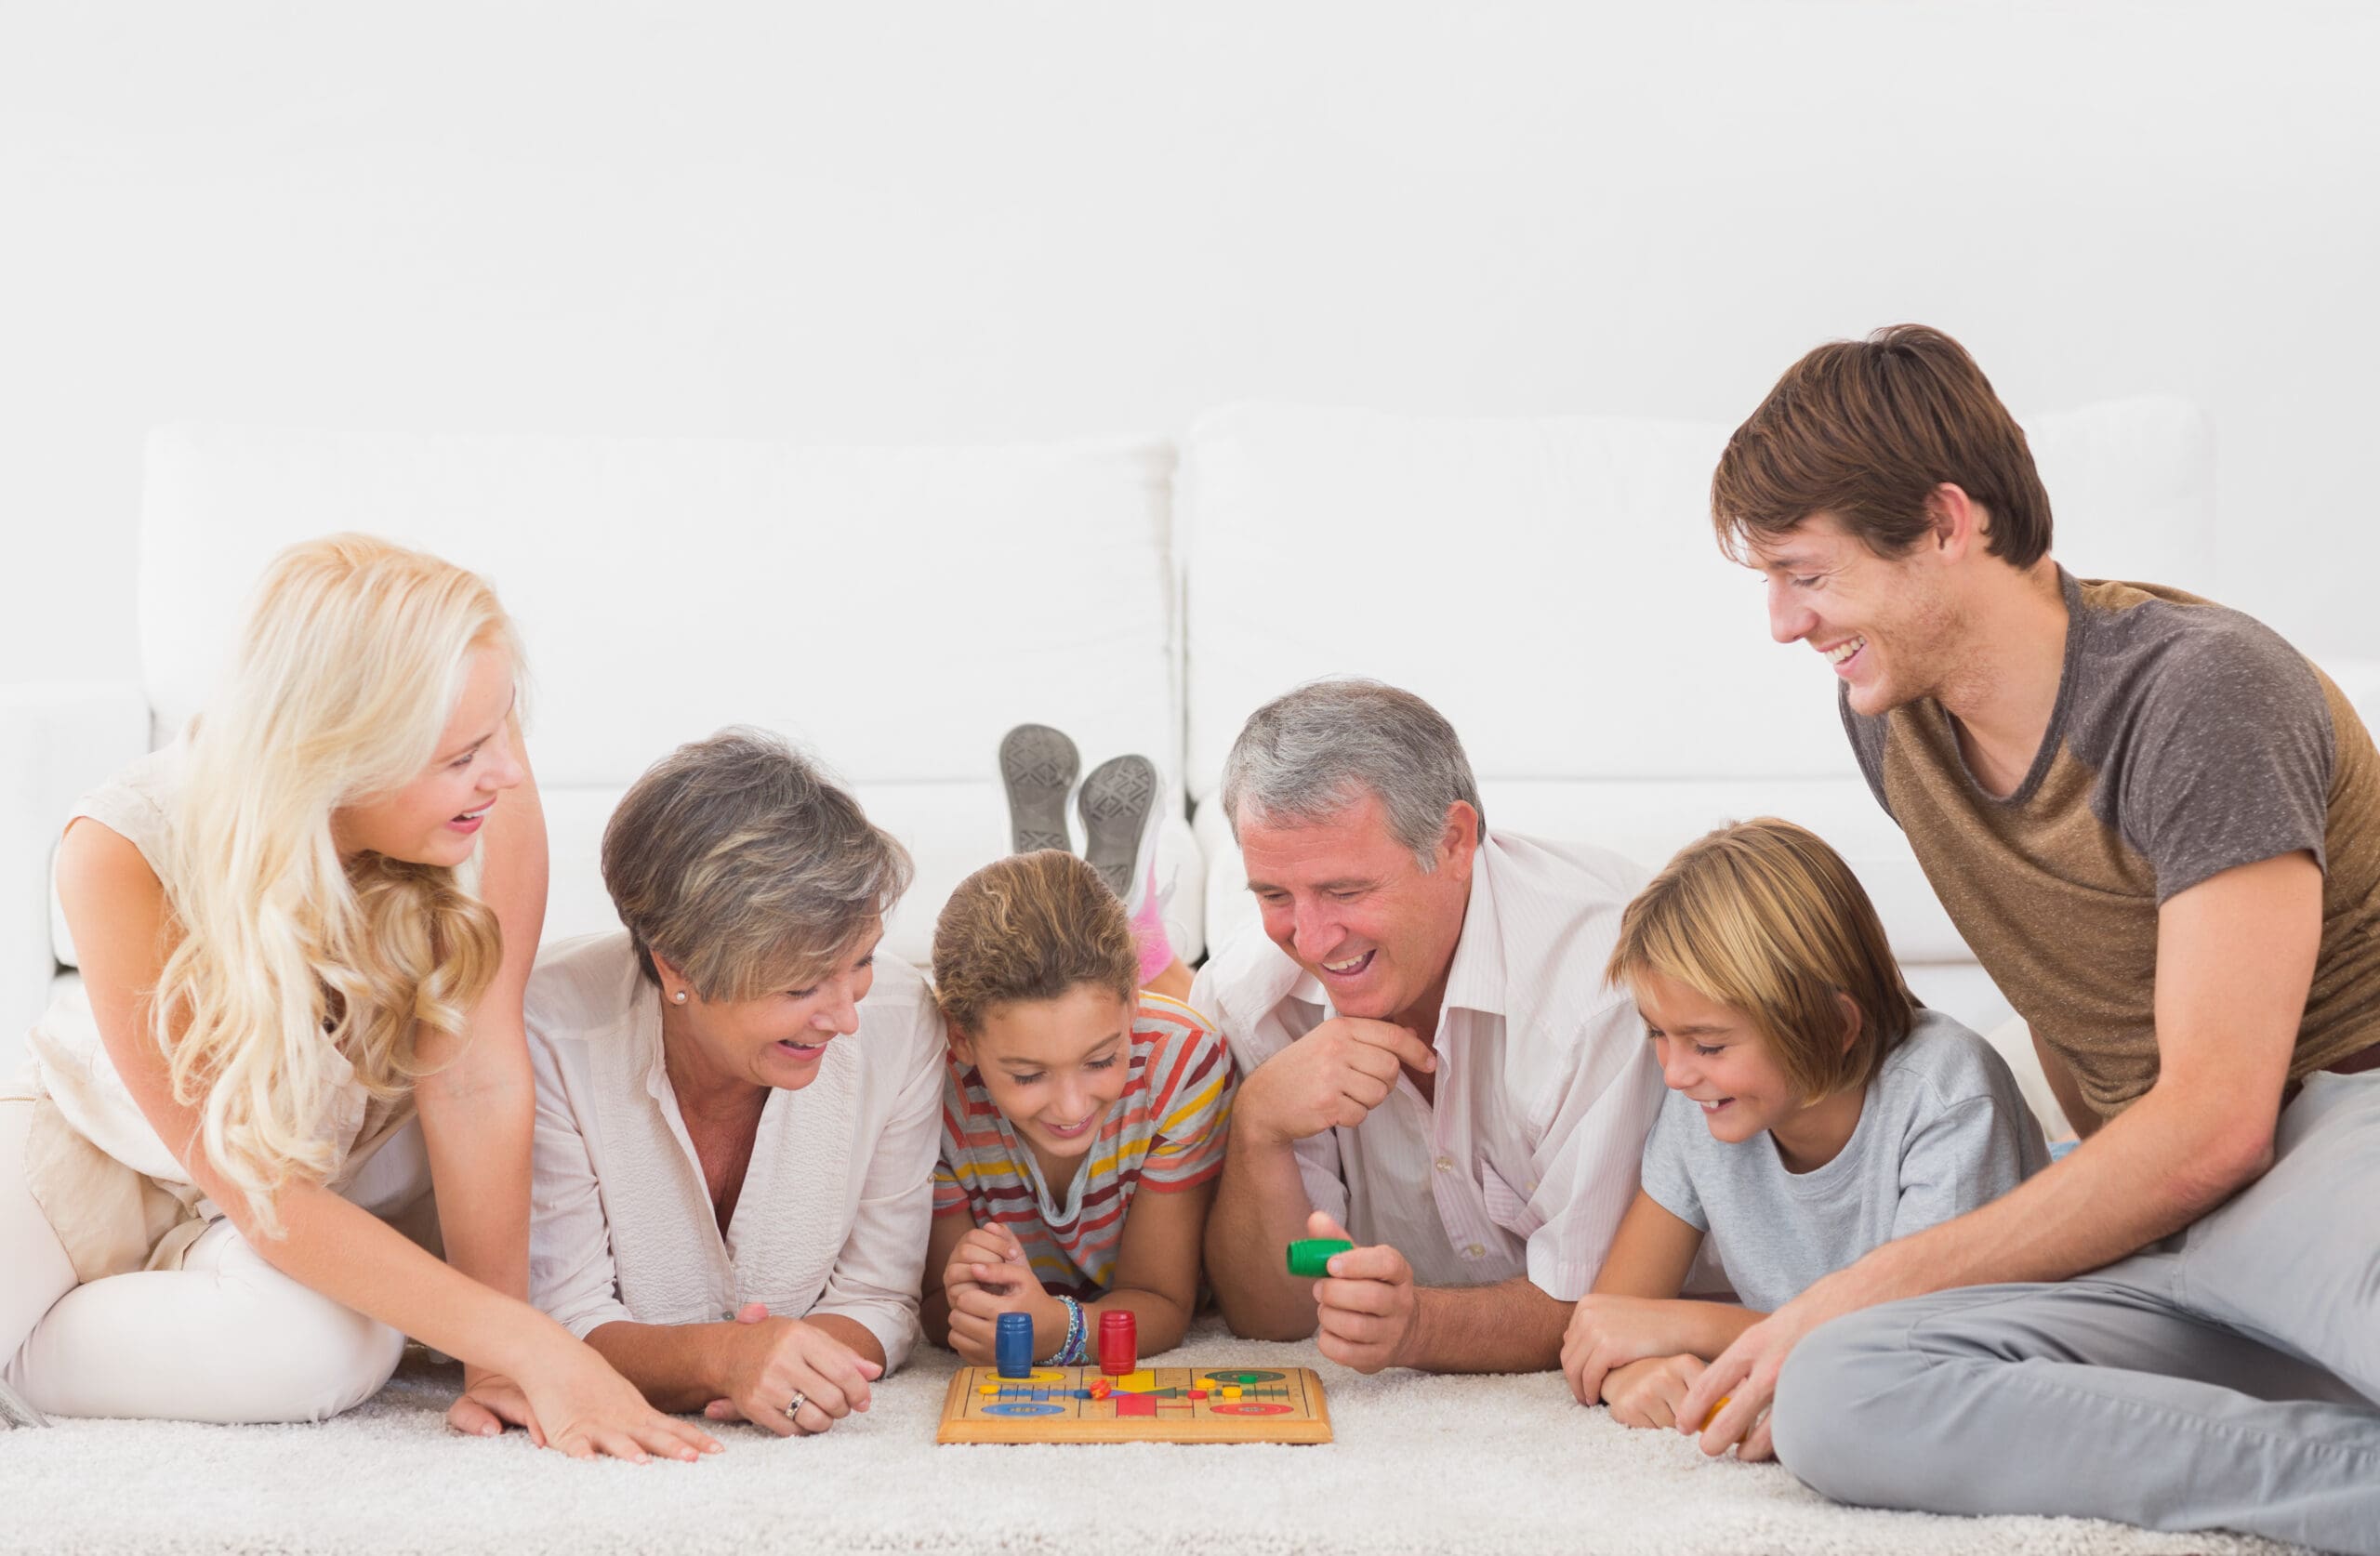 Game On! The Ideal Guide to Board Games for Kids